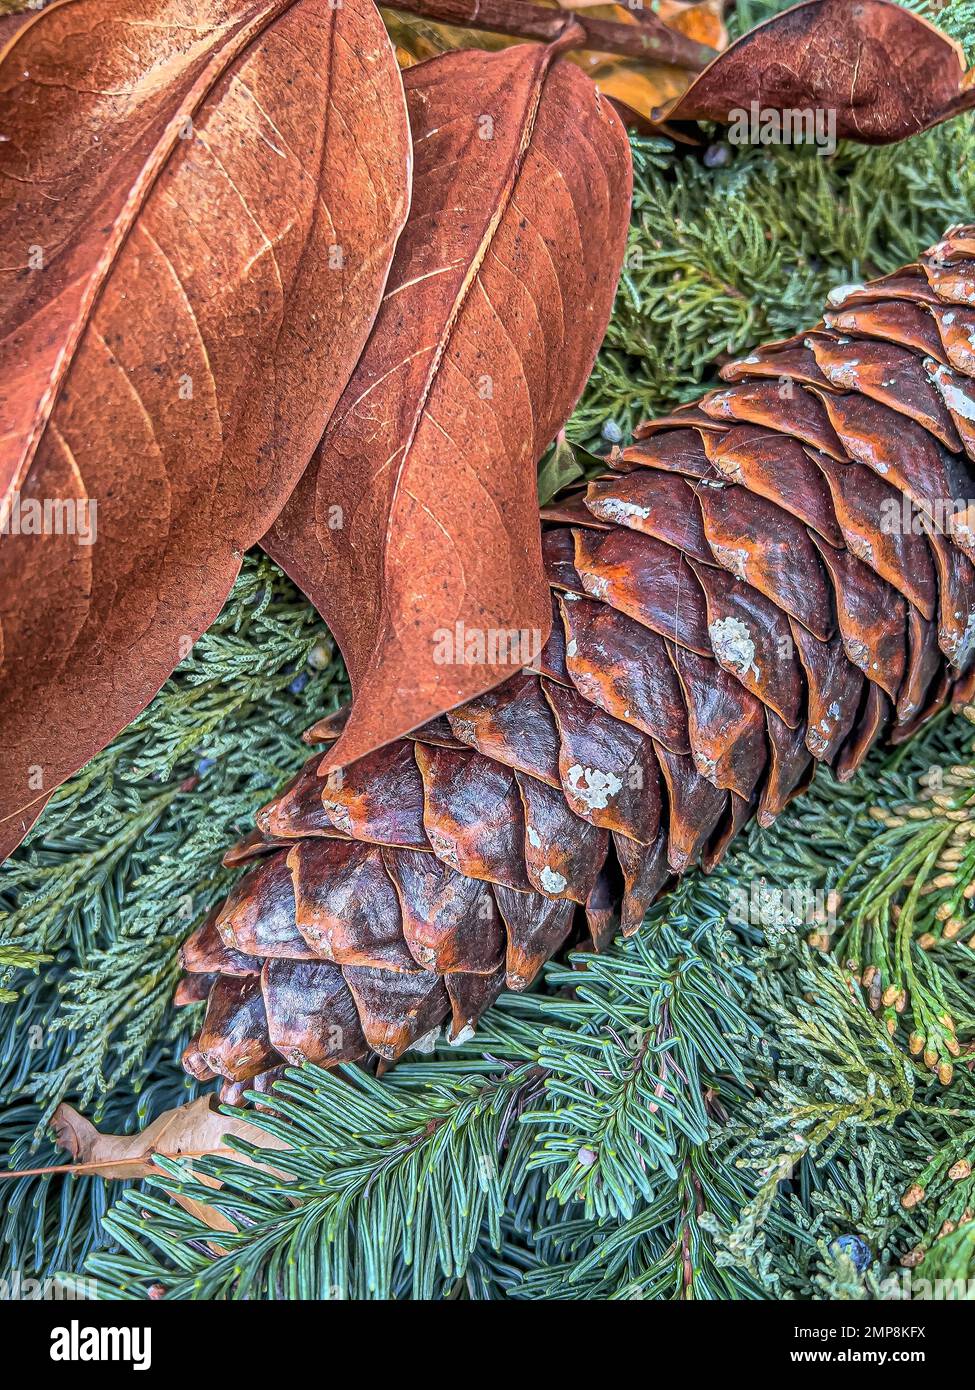 Large wet pine cone in bed of leaves in a bed of everygreens Stock Photo